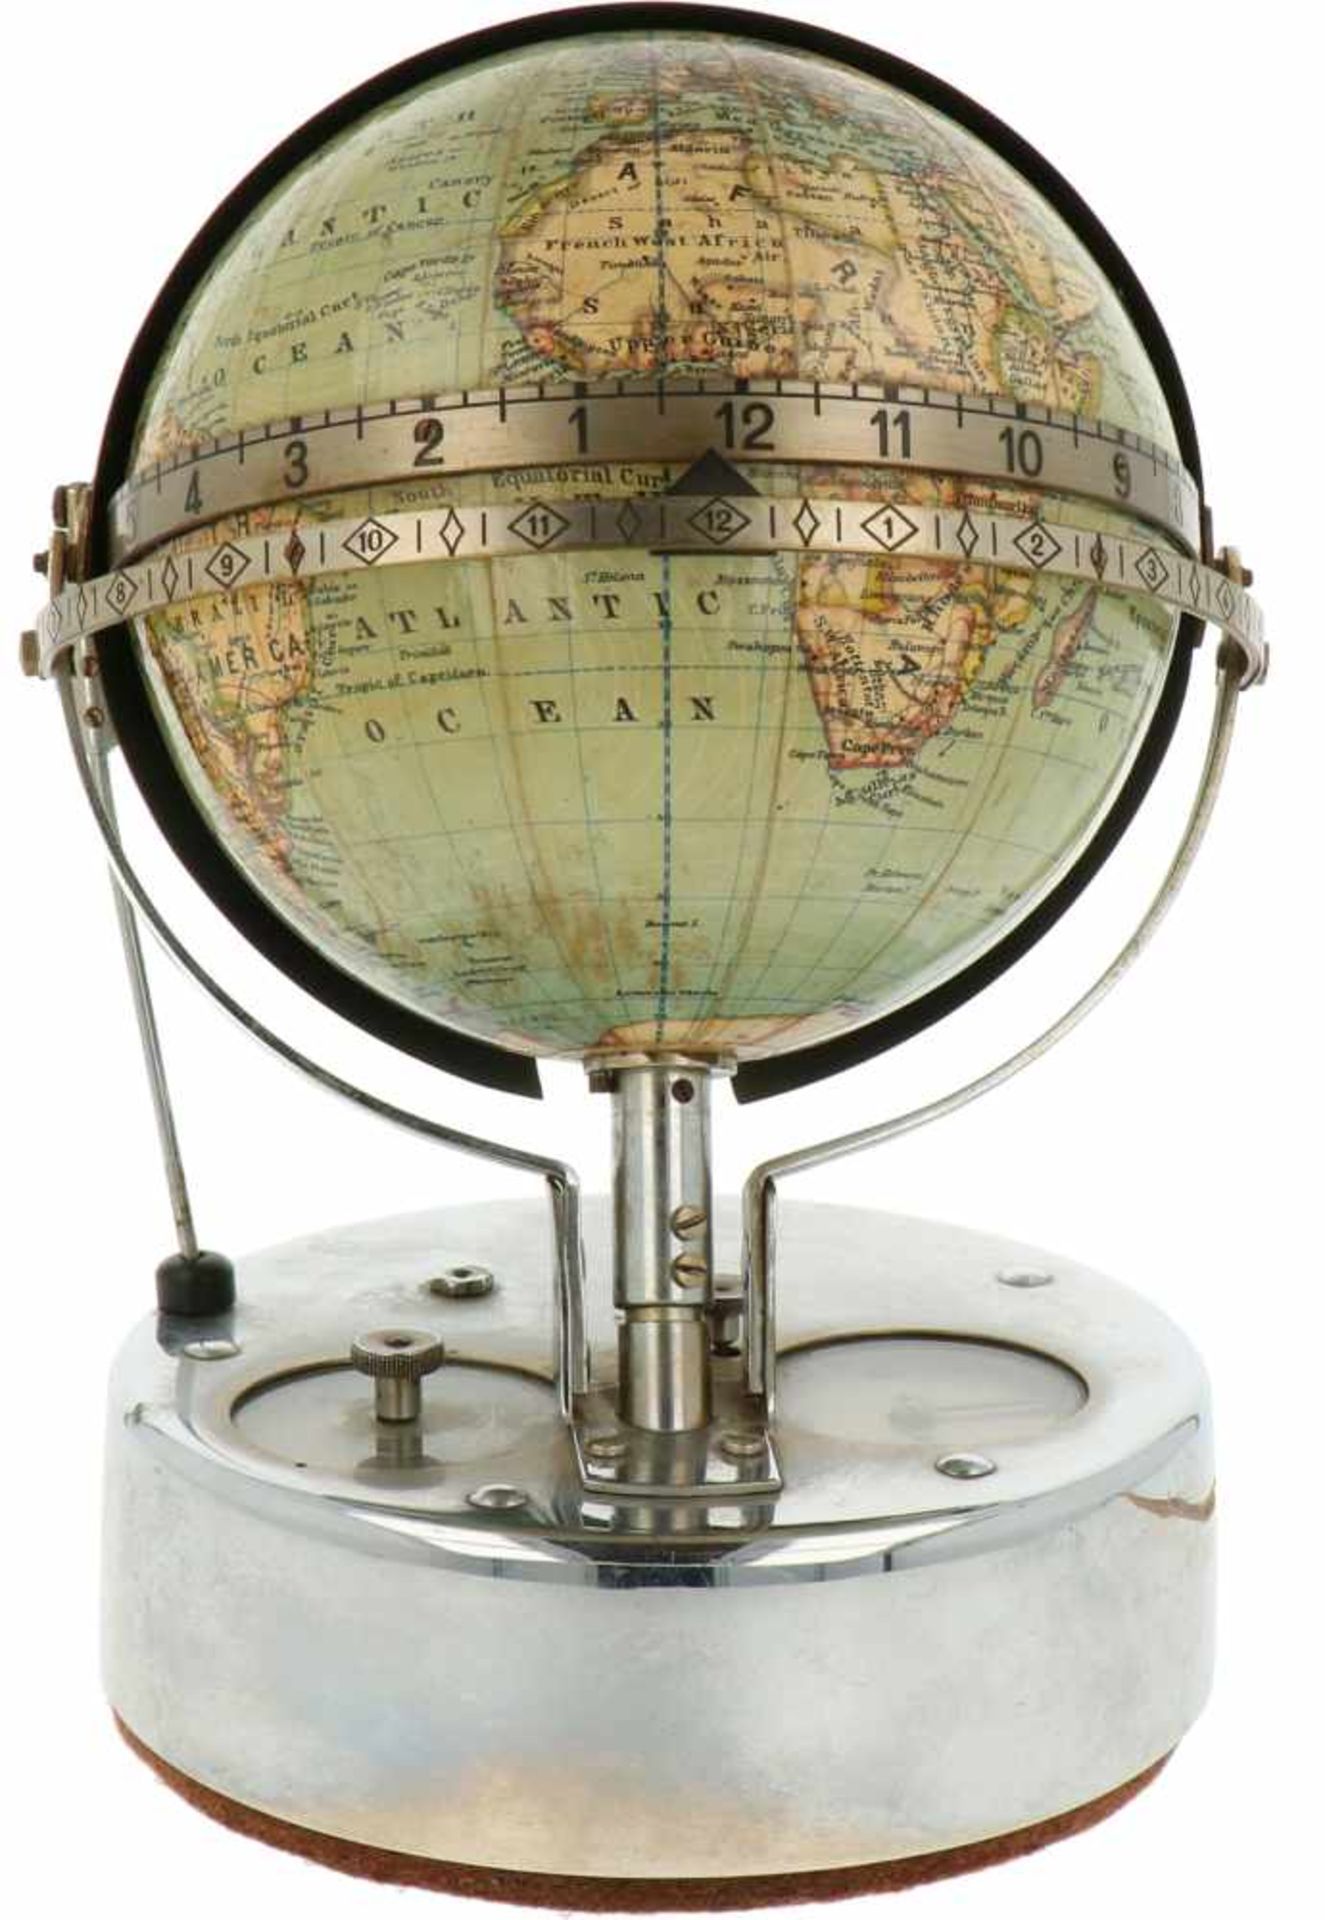 A table globe clock, electric wired. Germany, First half 20th century.